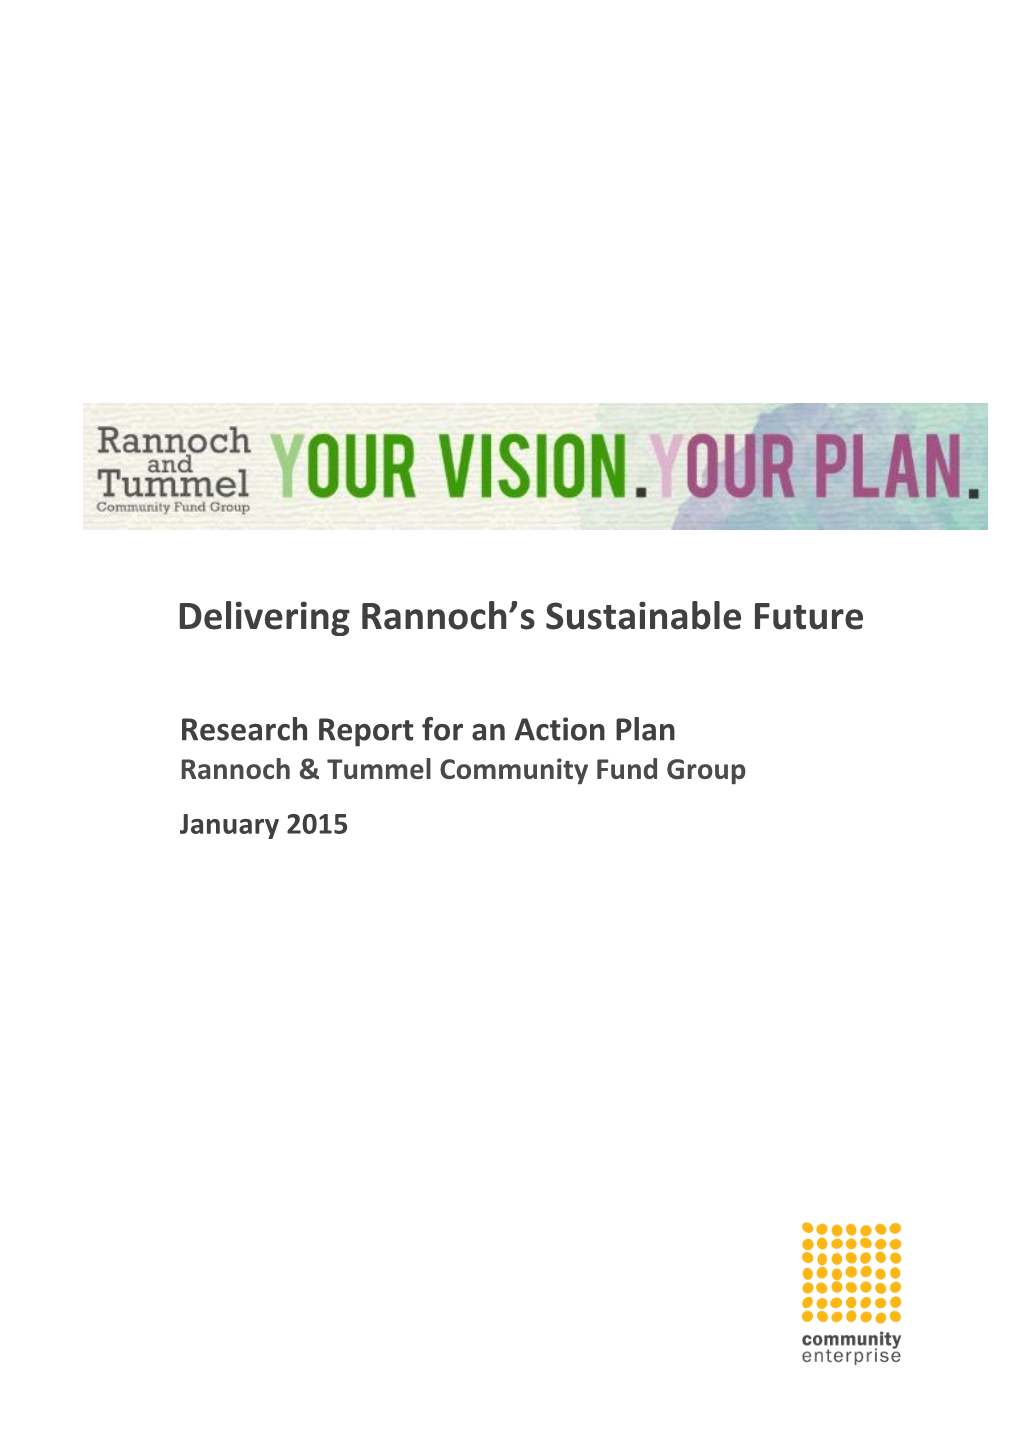 Delivering Rannoch's Sustainable Future